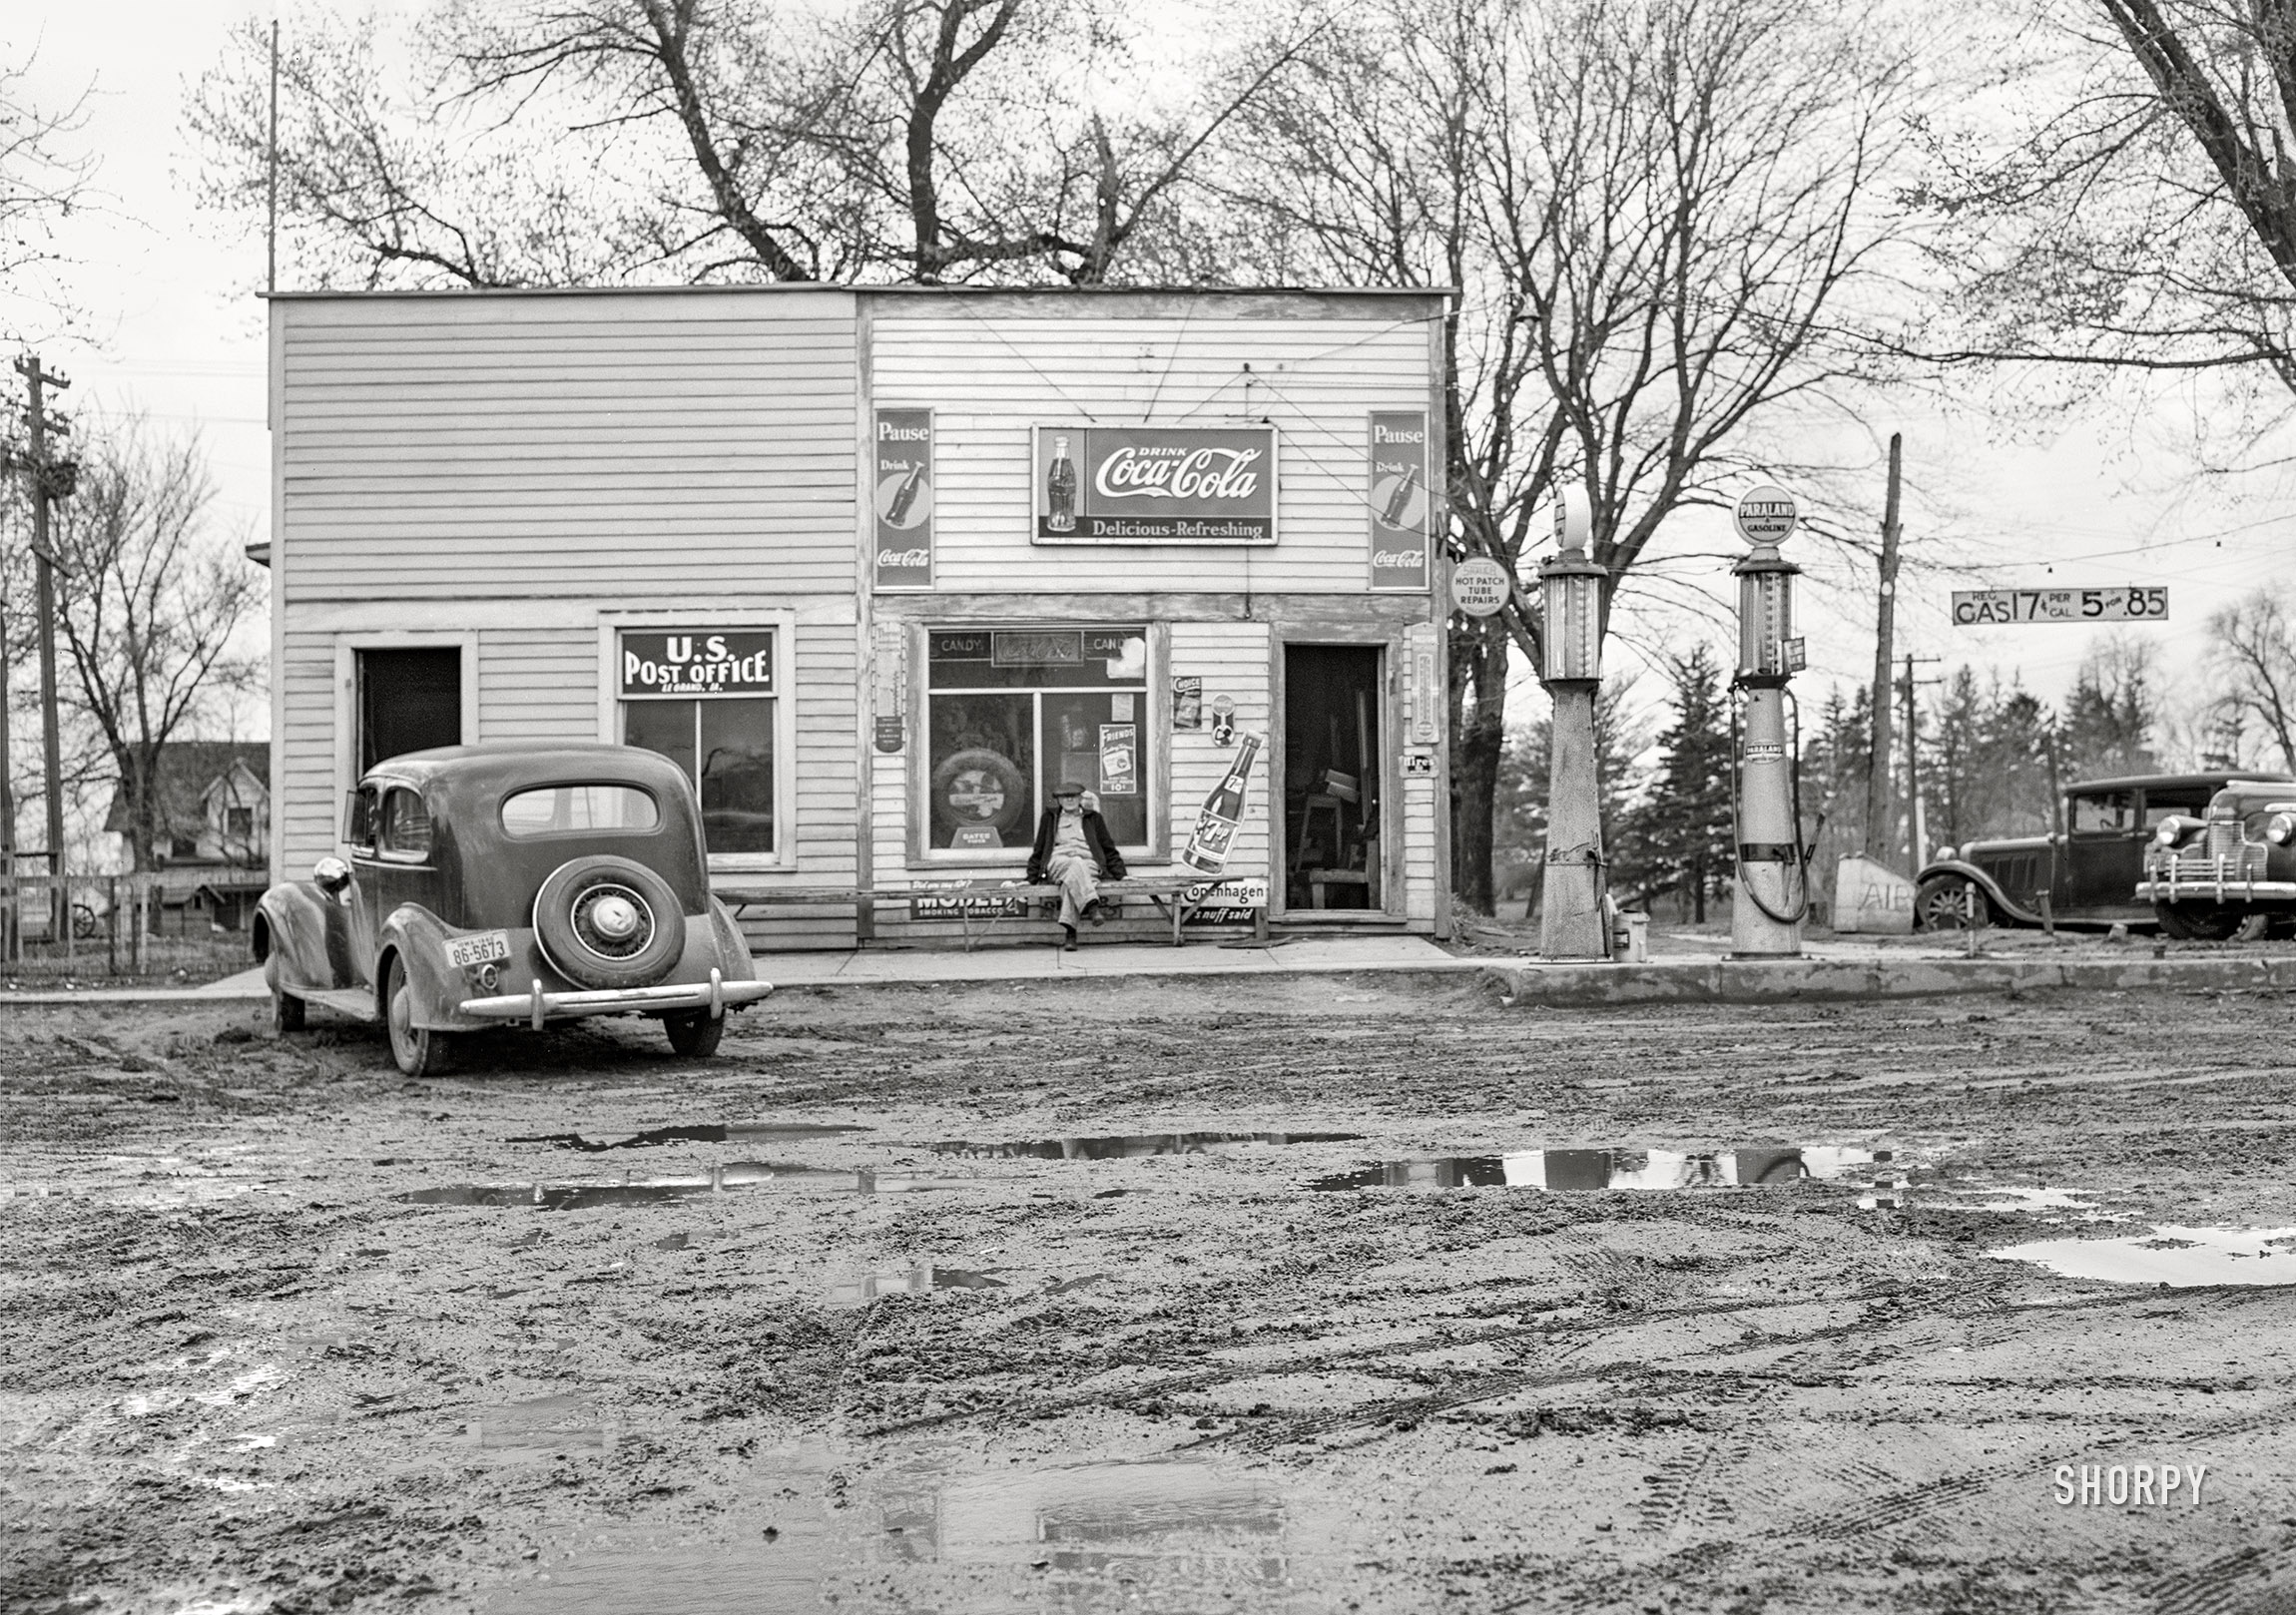 April 1940. "Post office and gas station. Le Grand, Iowa." Medium format acetate negative by John Vachon for the Farm Security Administration. View full size.